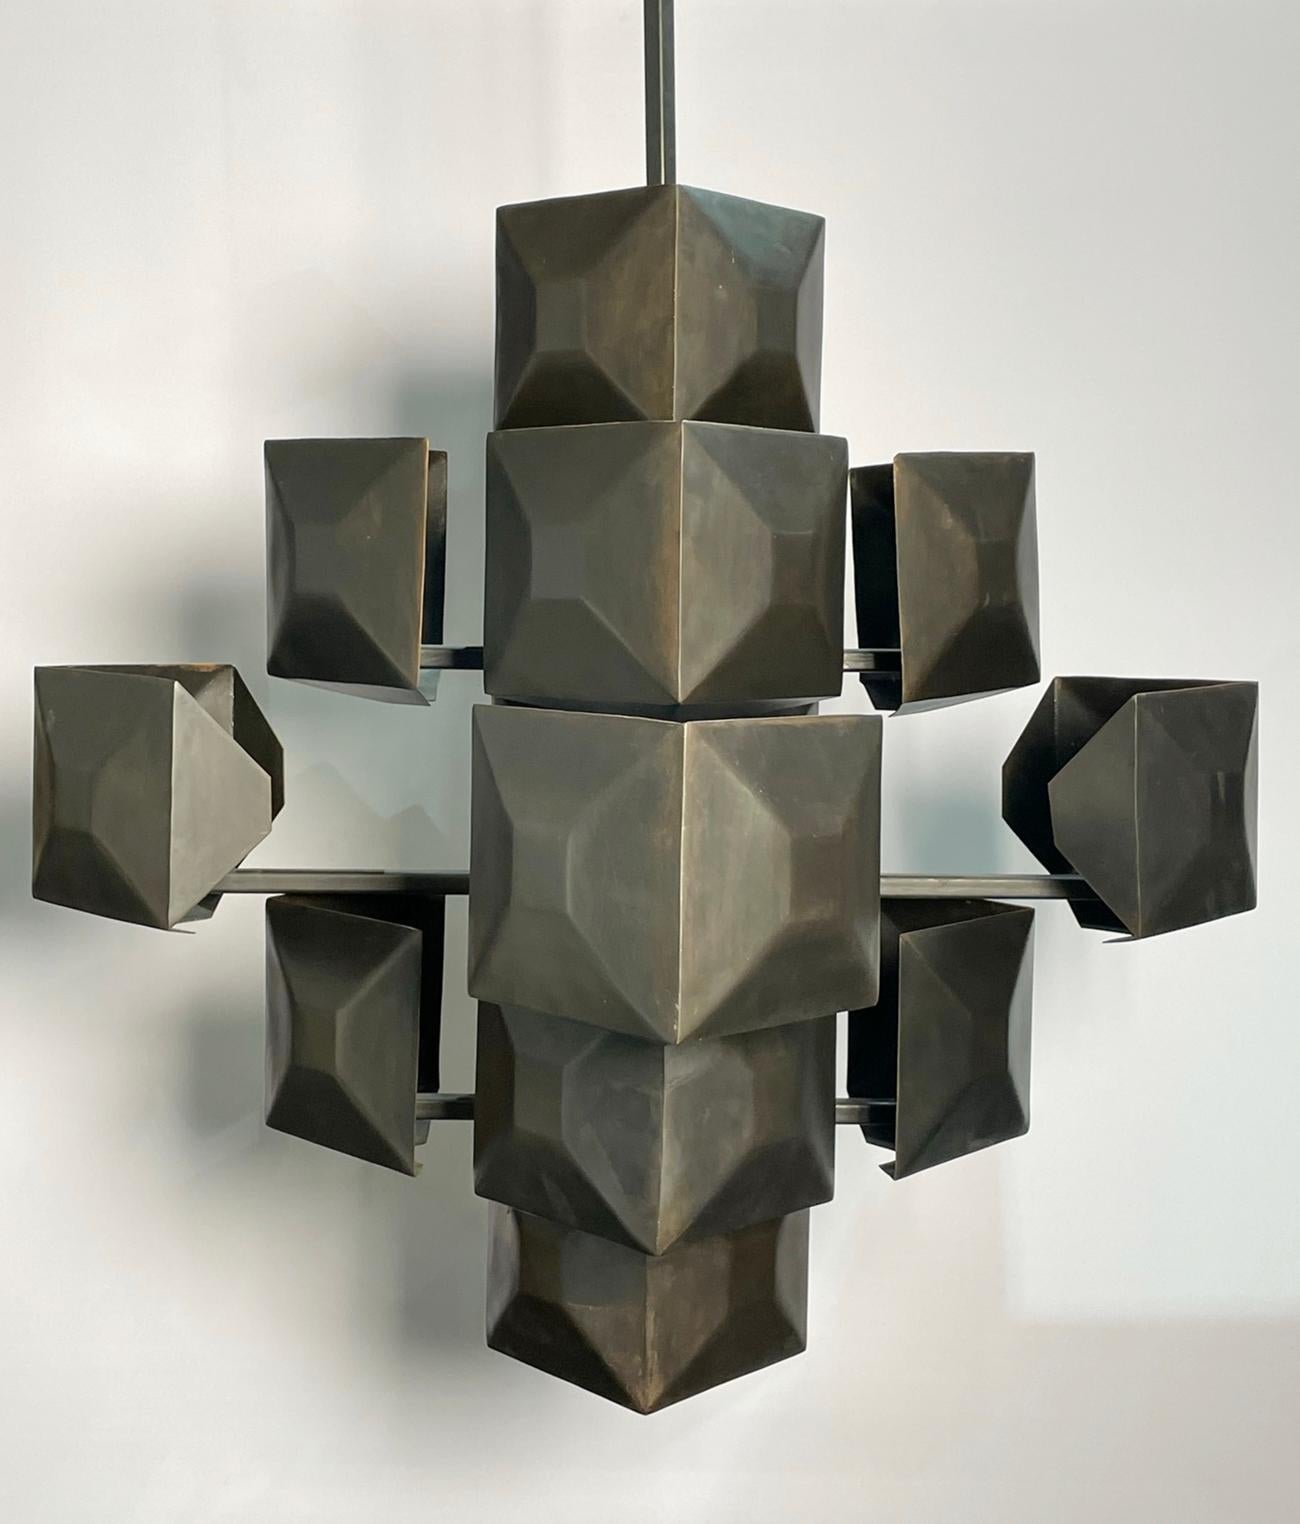 Introducing the Large Blackened Steel Chandelier, expertly crafted in the USA by the renowned artisans at Blackman Cruz. This stunning metal sculpture features an abstract design composed of multiple cubes and squares, creating a unique and